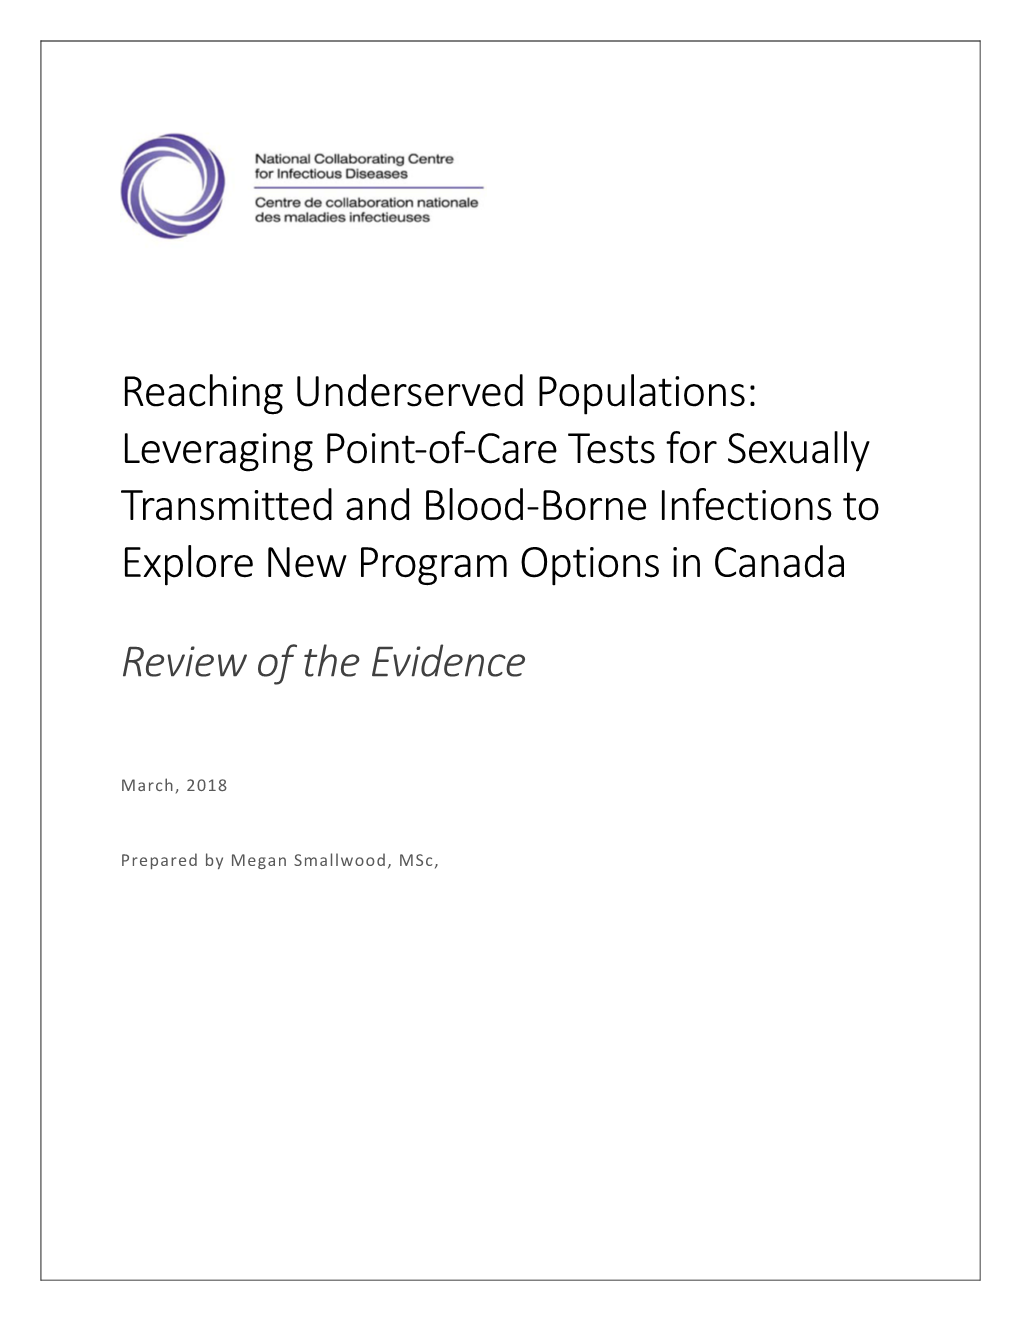 Reaching Underserved Populations: Leveraging Point-Of-Care Tests for Sexually Transmitted and Blood-Borne Infections to Explore New Program Options in Canada